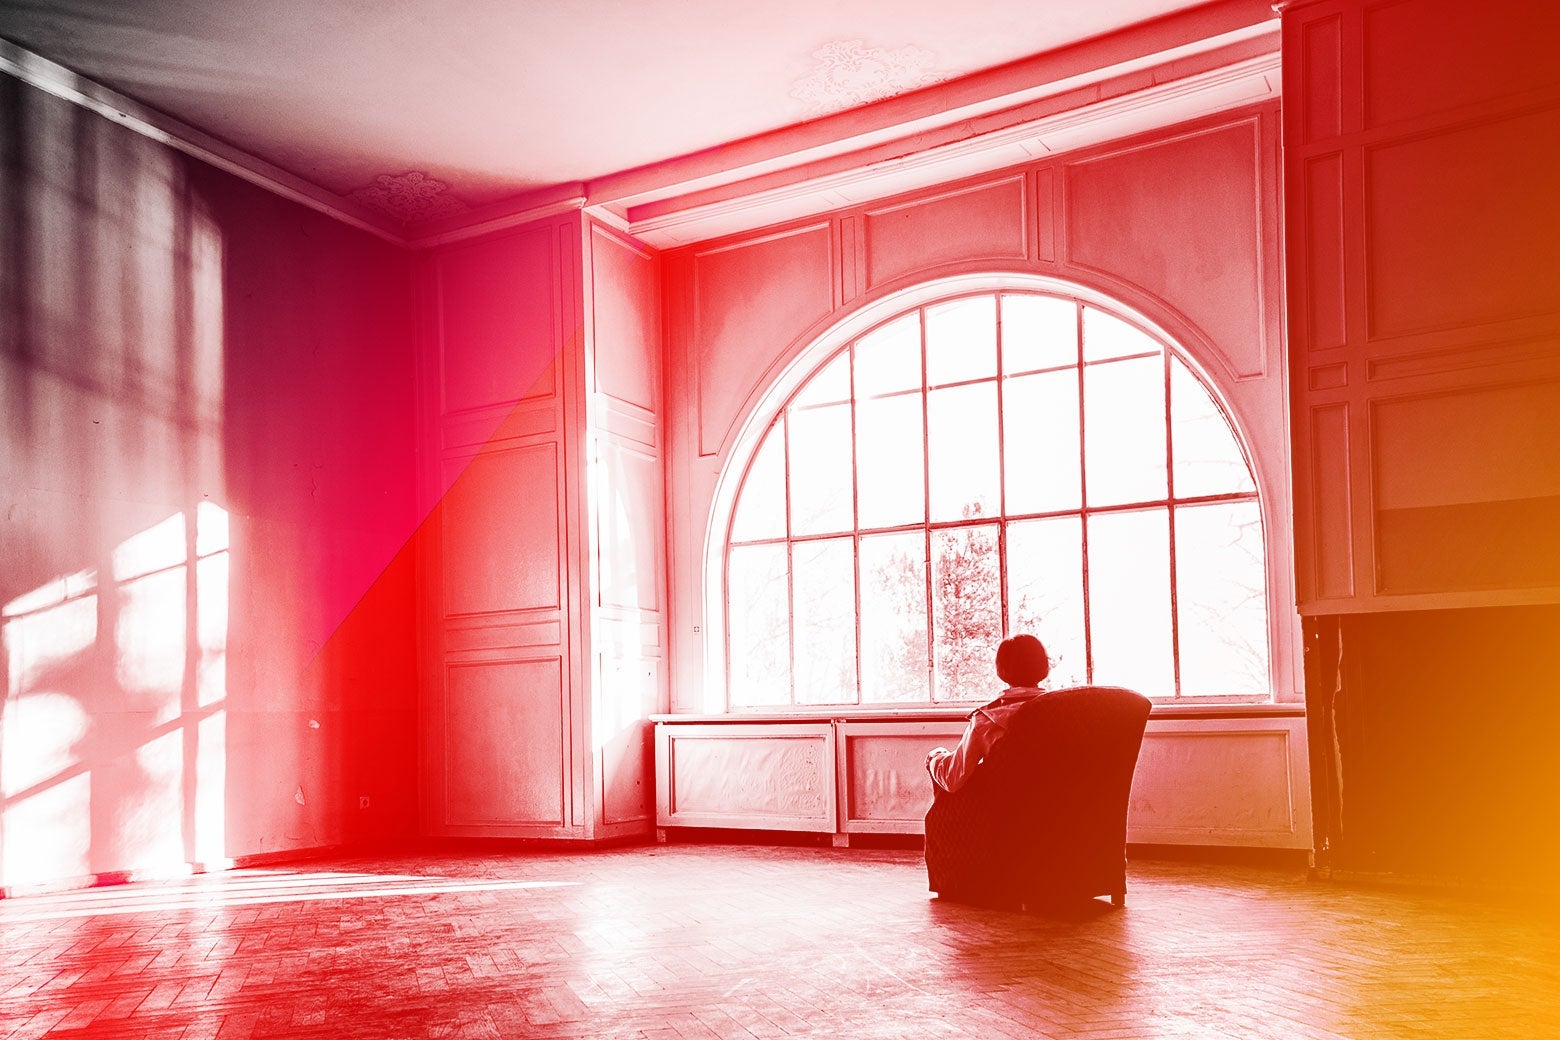 A woman sits alone in a massive room with sunlit windows.